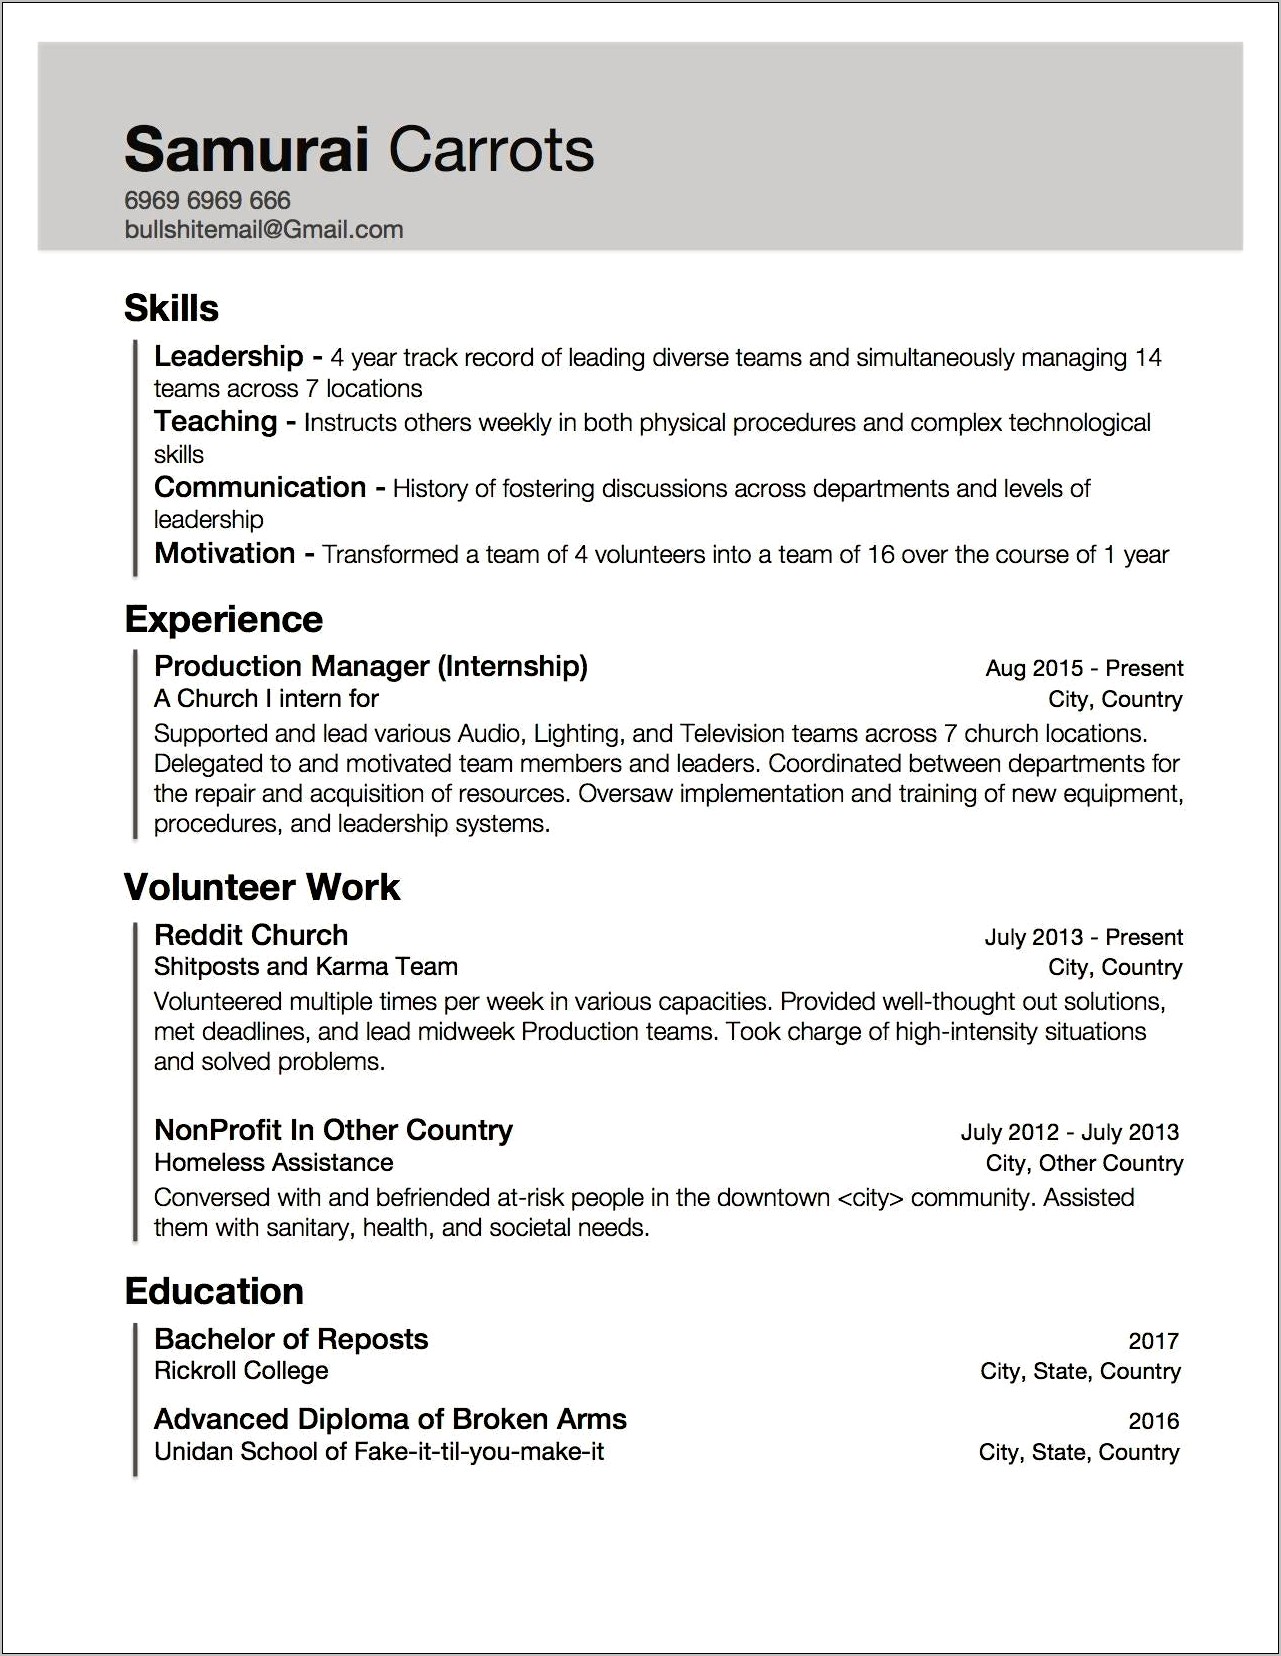 Resume With Experience But Little Education